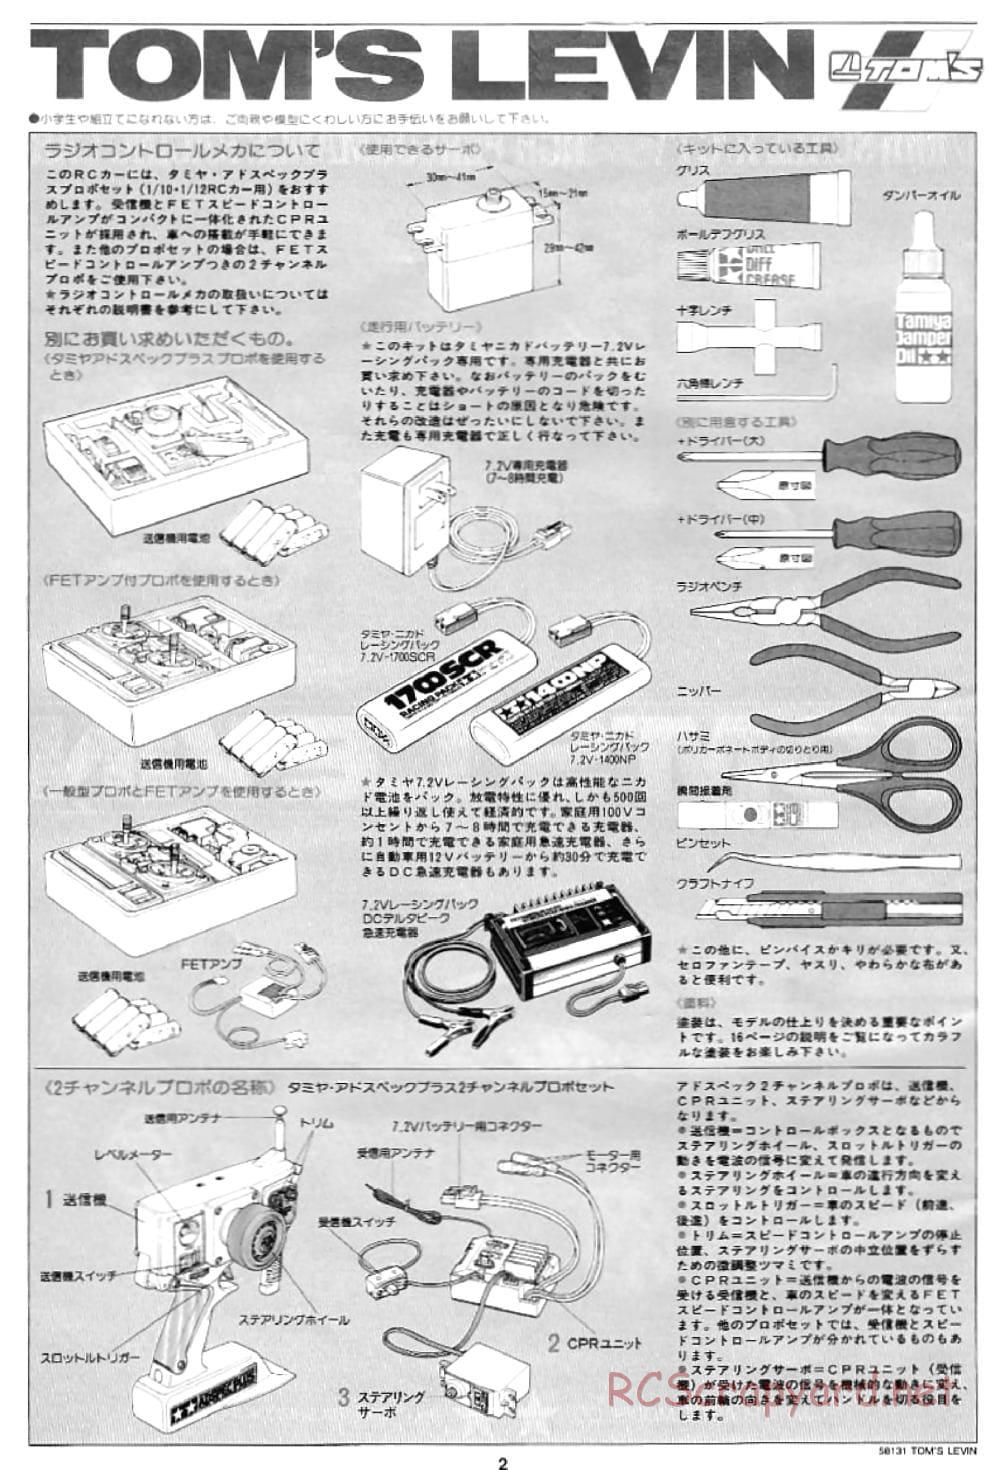 Tamiya - Toyota Tom's Levin - FF-01 Chassis - Manual - Page 2